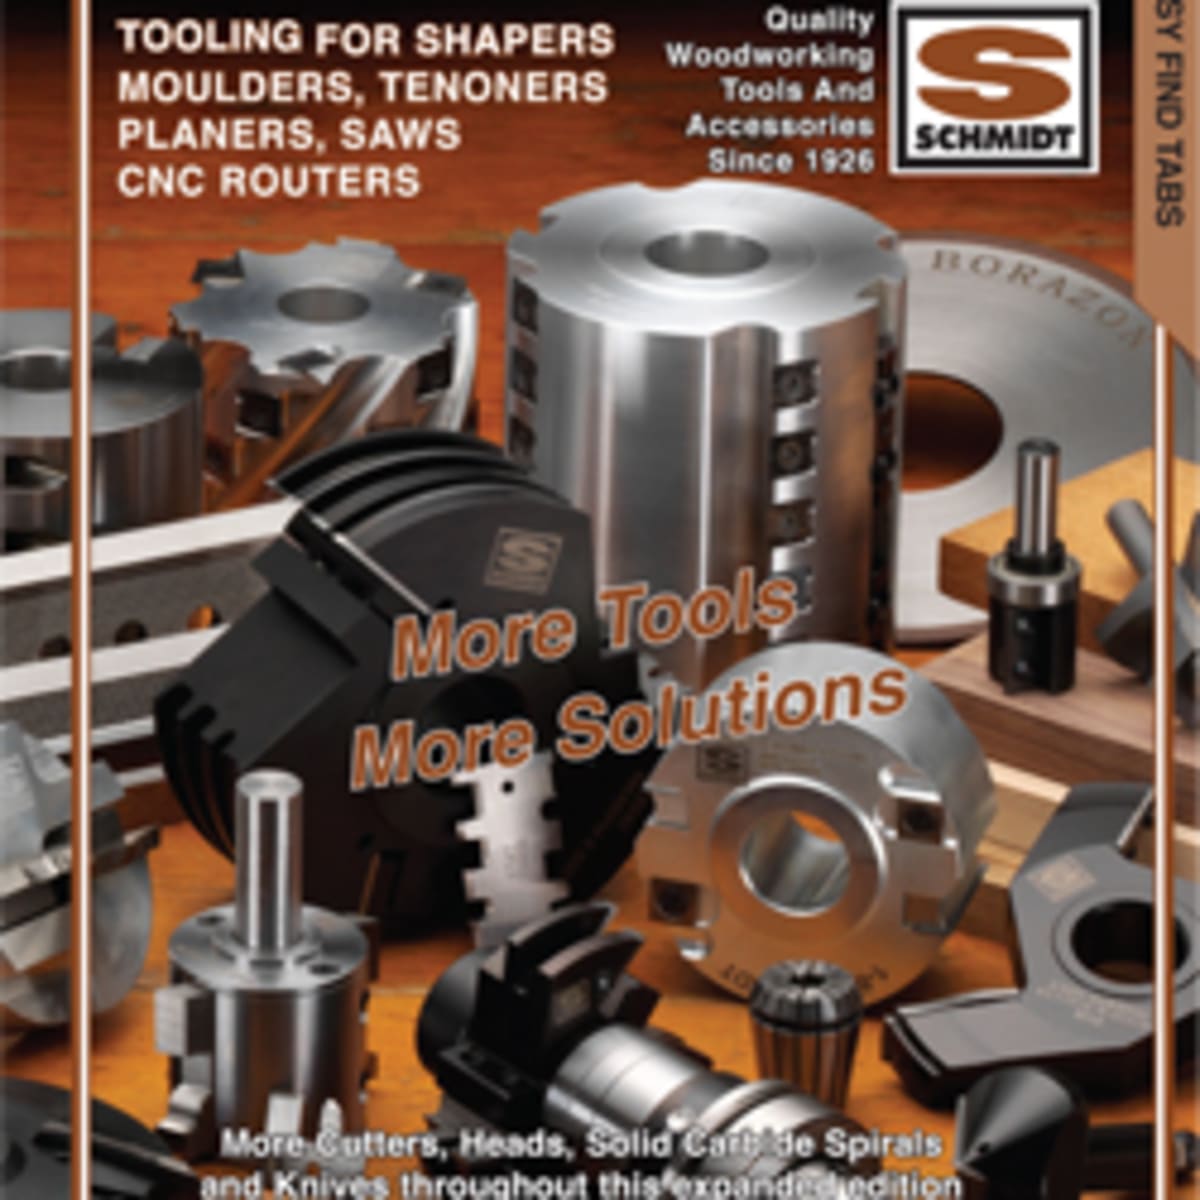 New Catalog From Schmidt Co Woodshop News